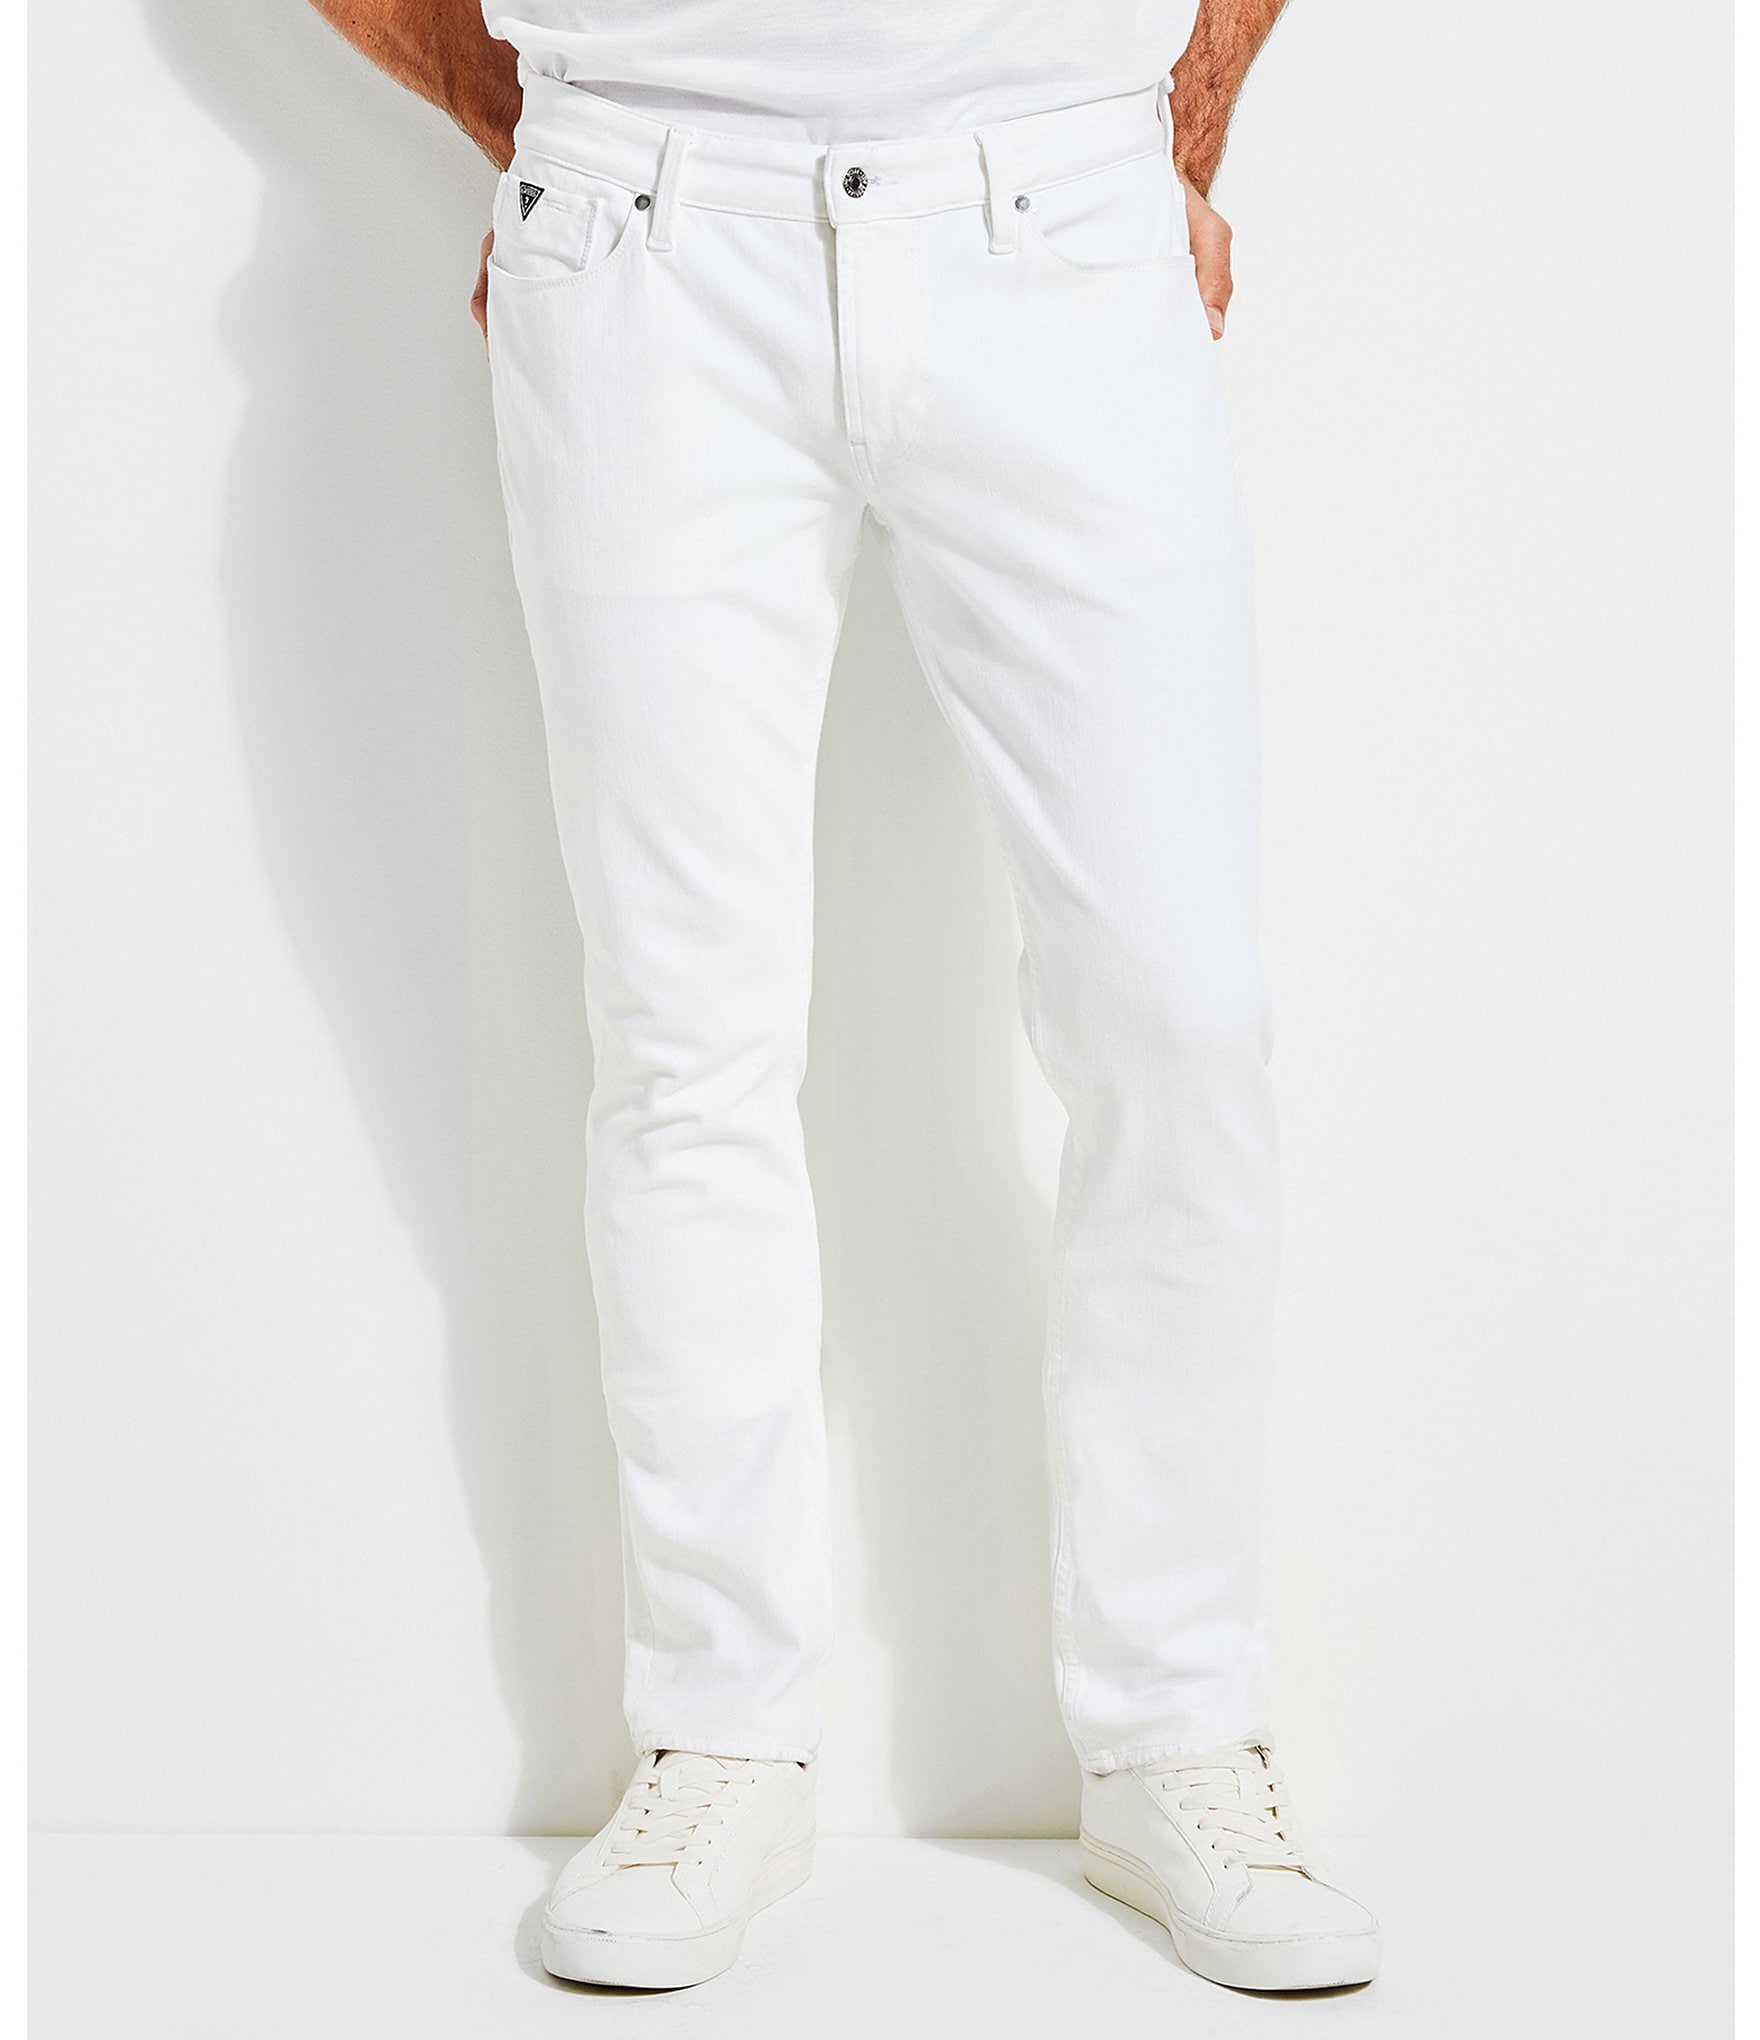 Guess Slim Fit Tapered White Jeans | Dillard's